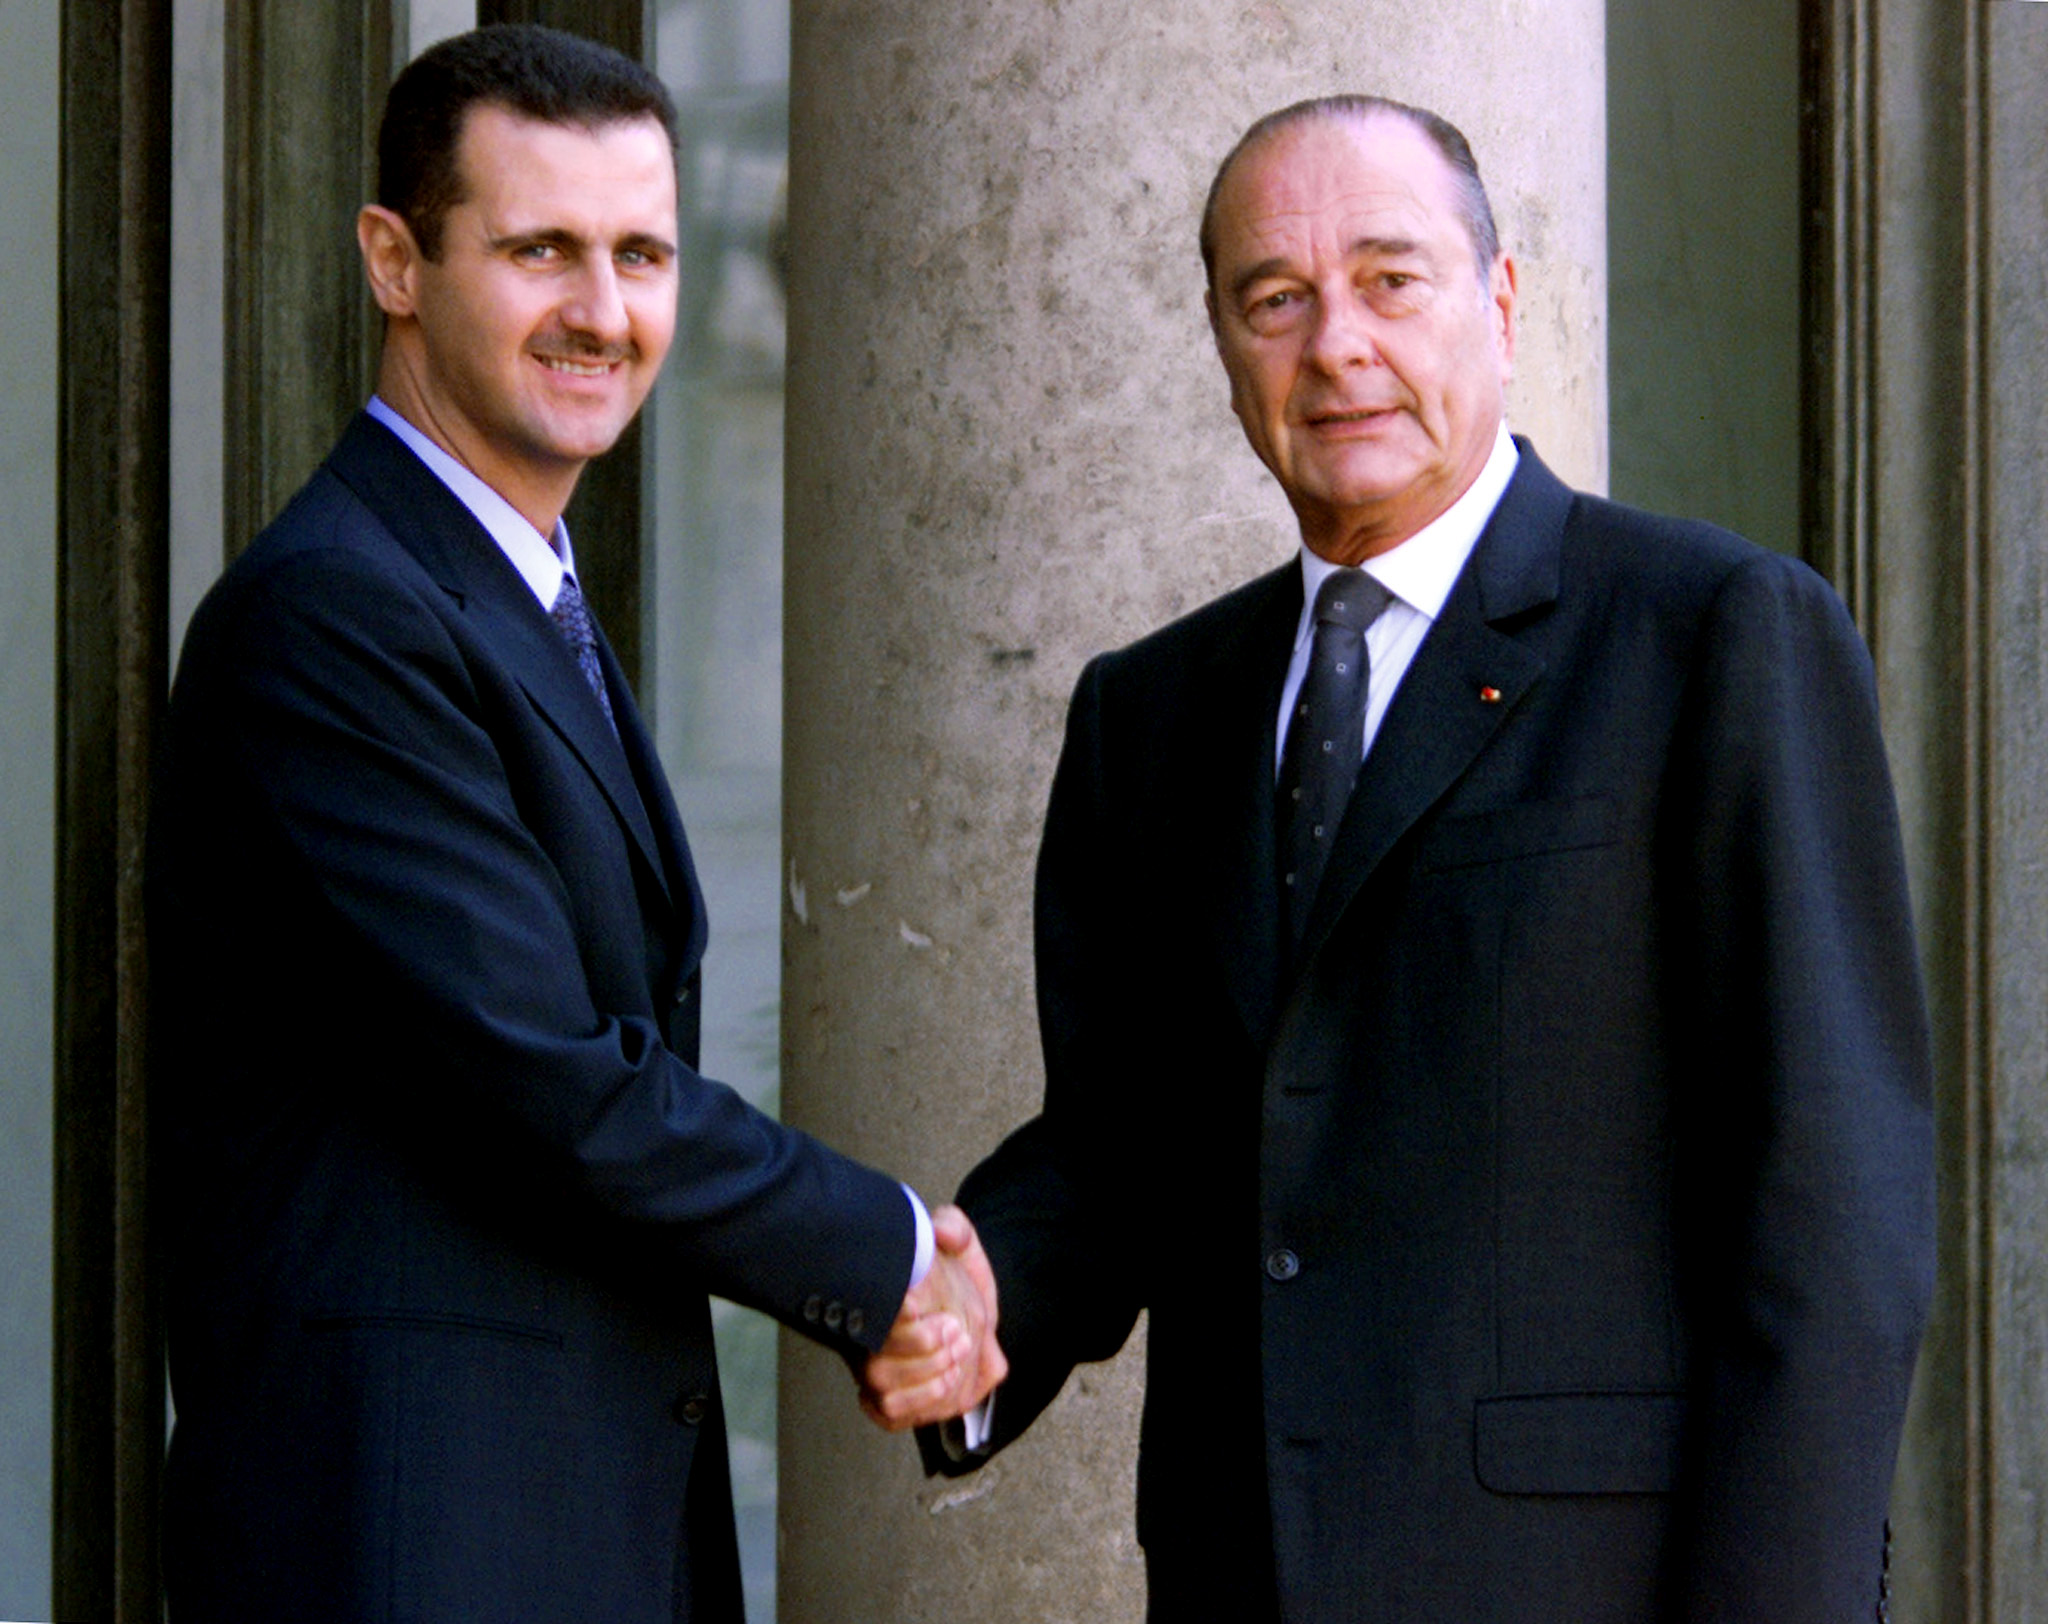 PHOTO:  In this file photo taken on June 25, 2001 Syrian President Bashar al-Assad is greeted by French President Jacques Chirac before their meeting at the Elysee Palace in Paris.